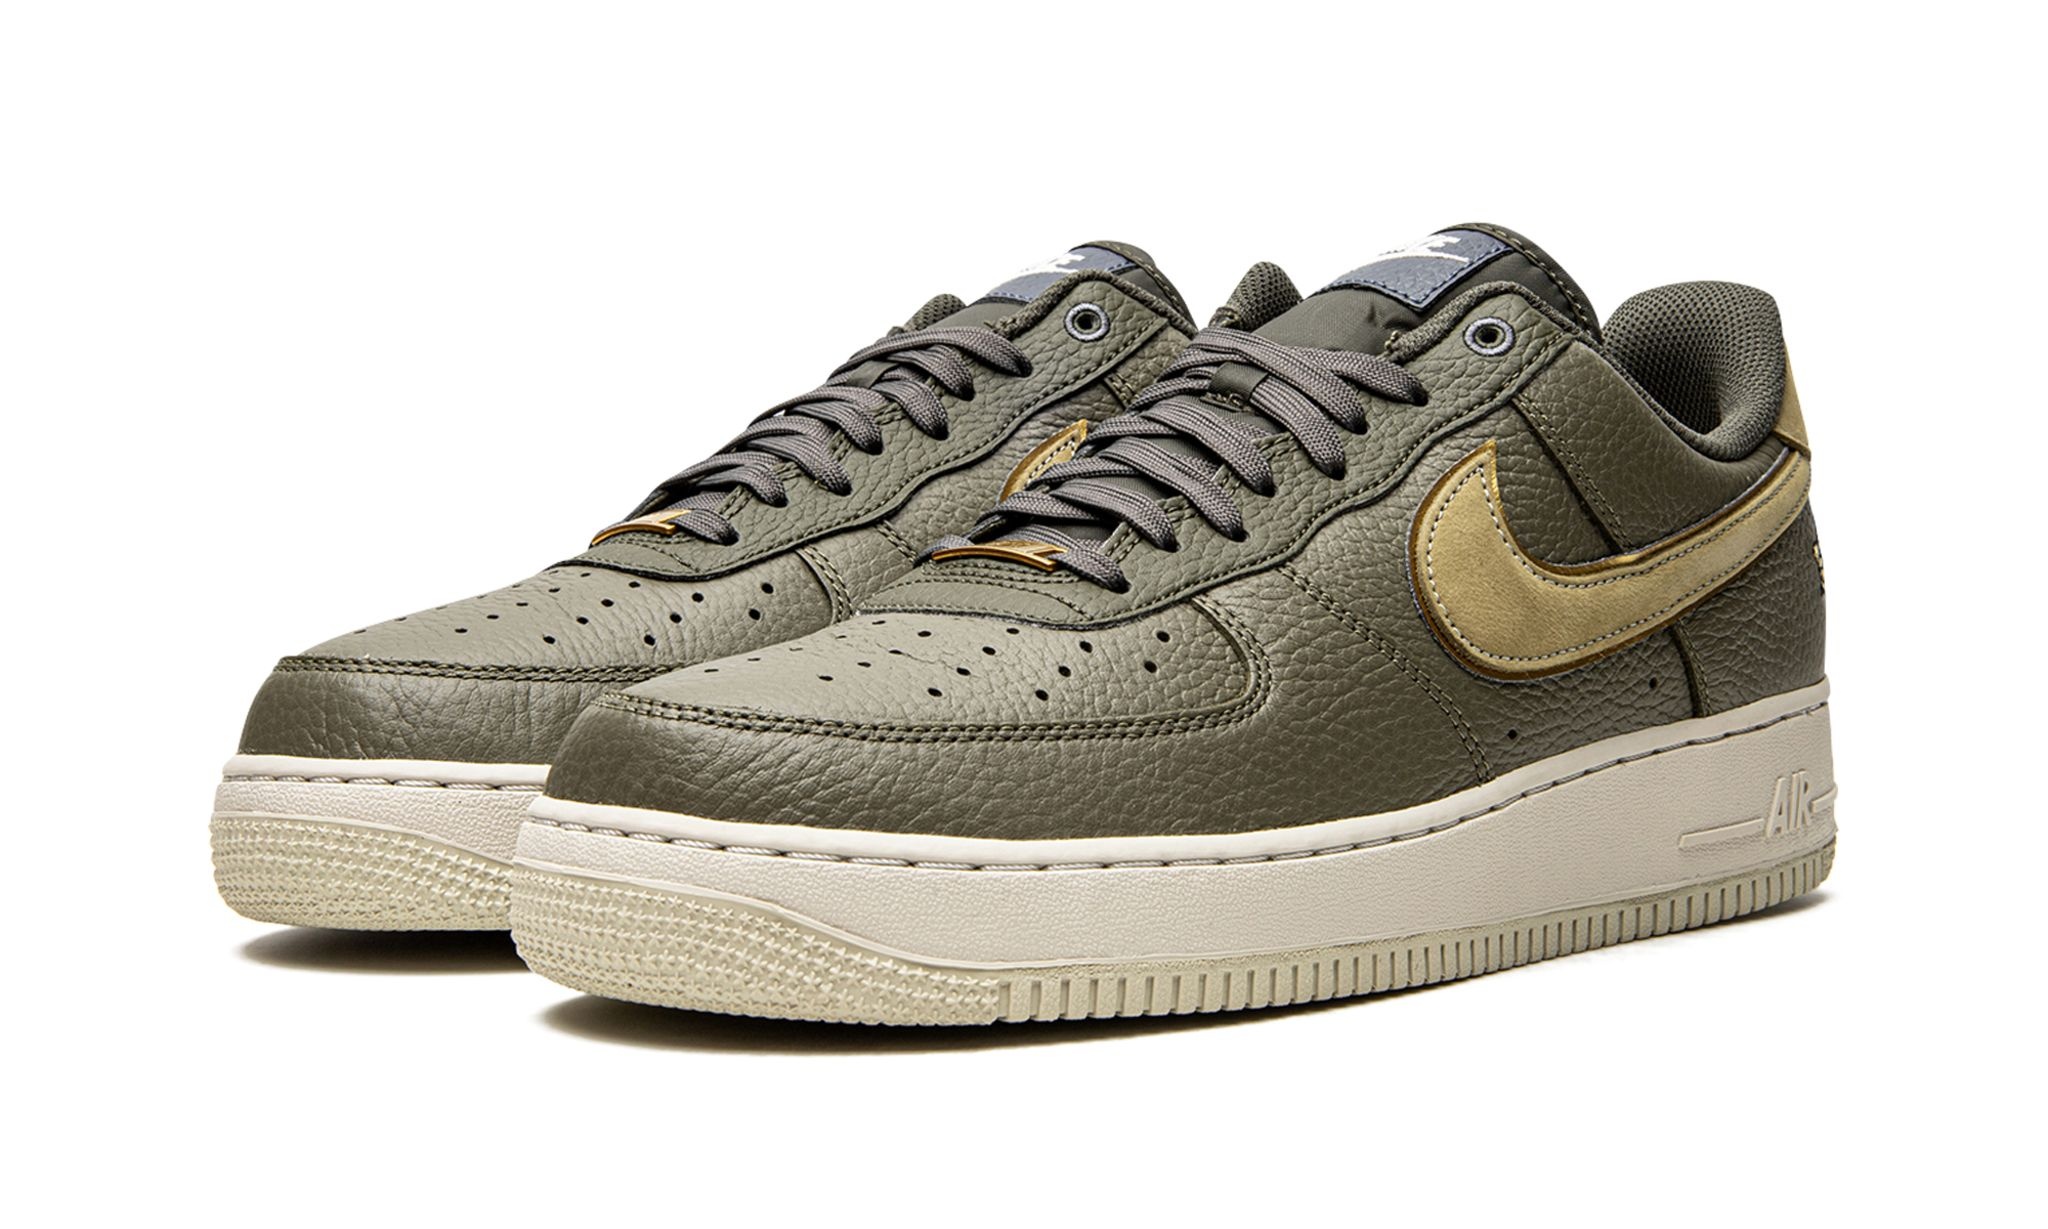 Air Force 1 '07 LX "Turtle" - 2